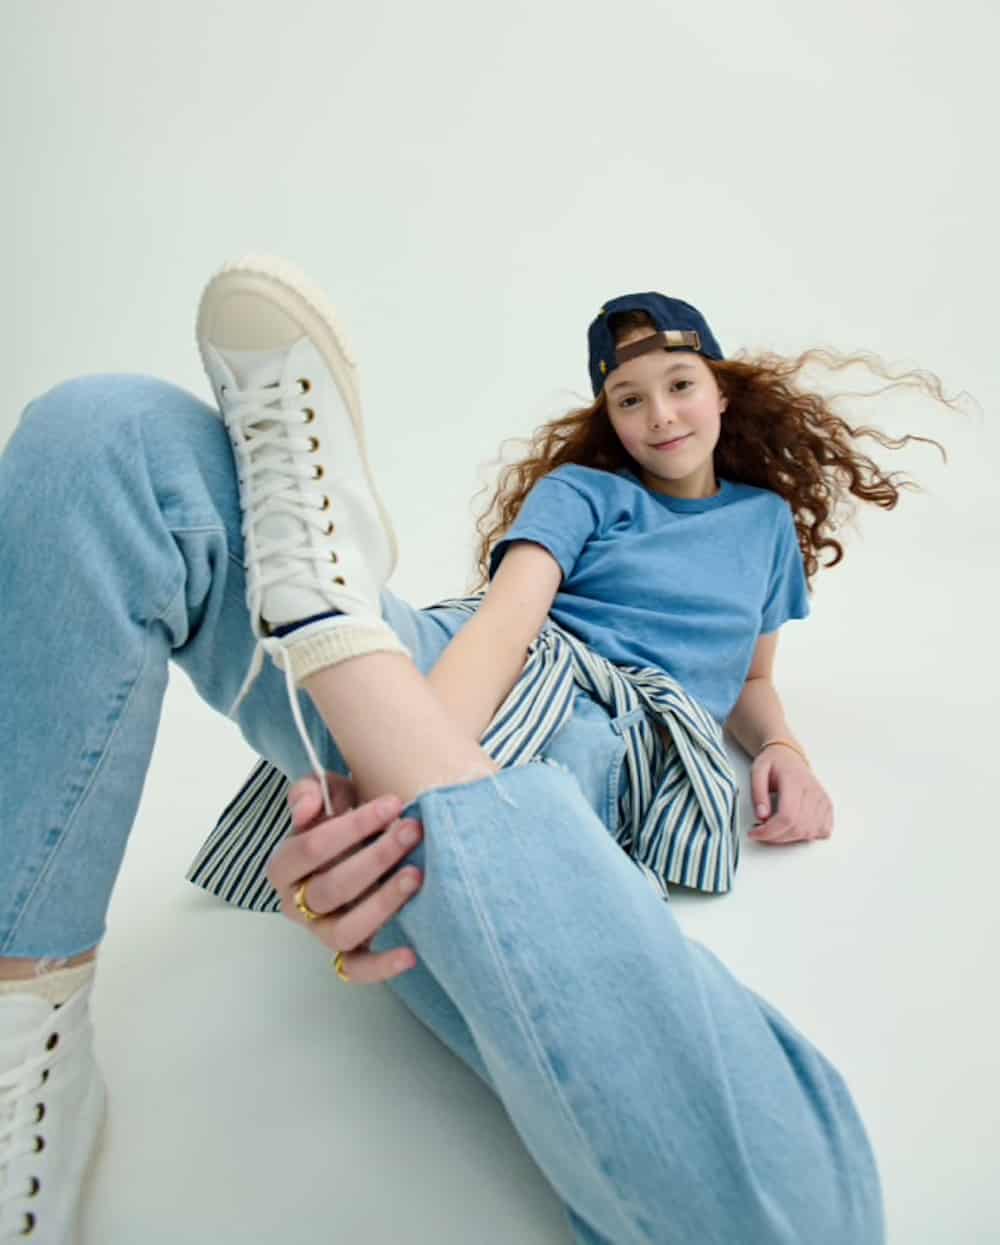 image of a young girl in a blue t-shirt and jeans leaning back with her foot up on her knee